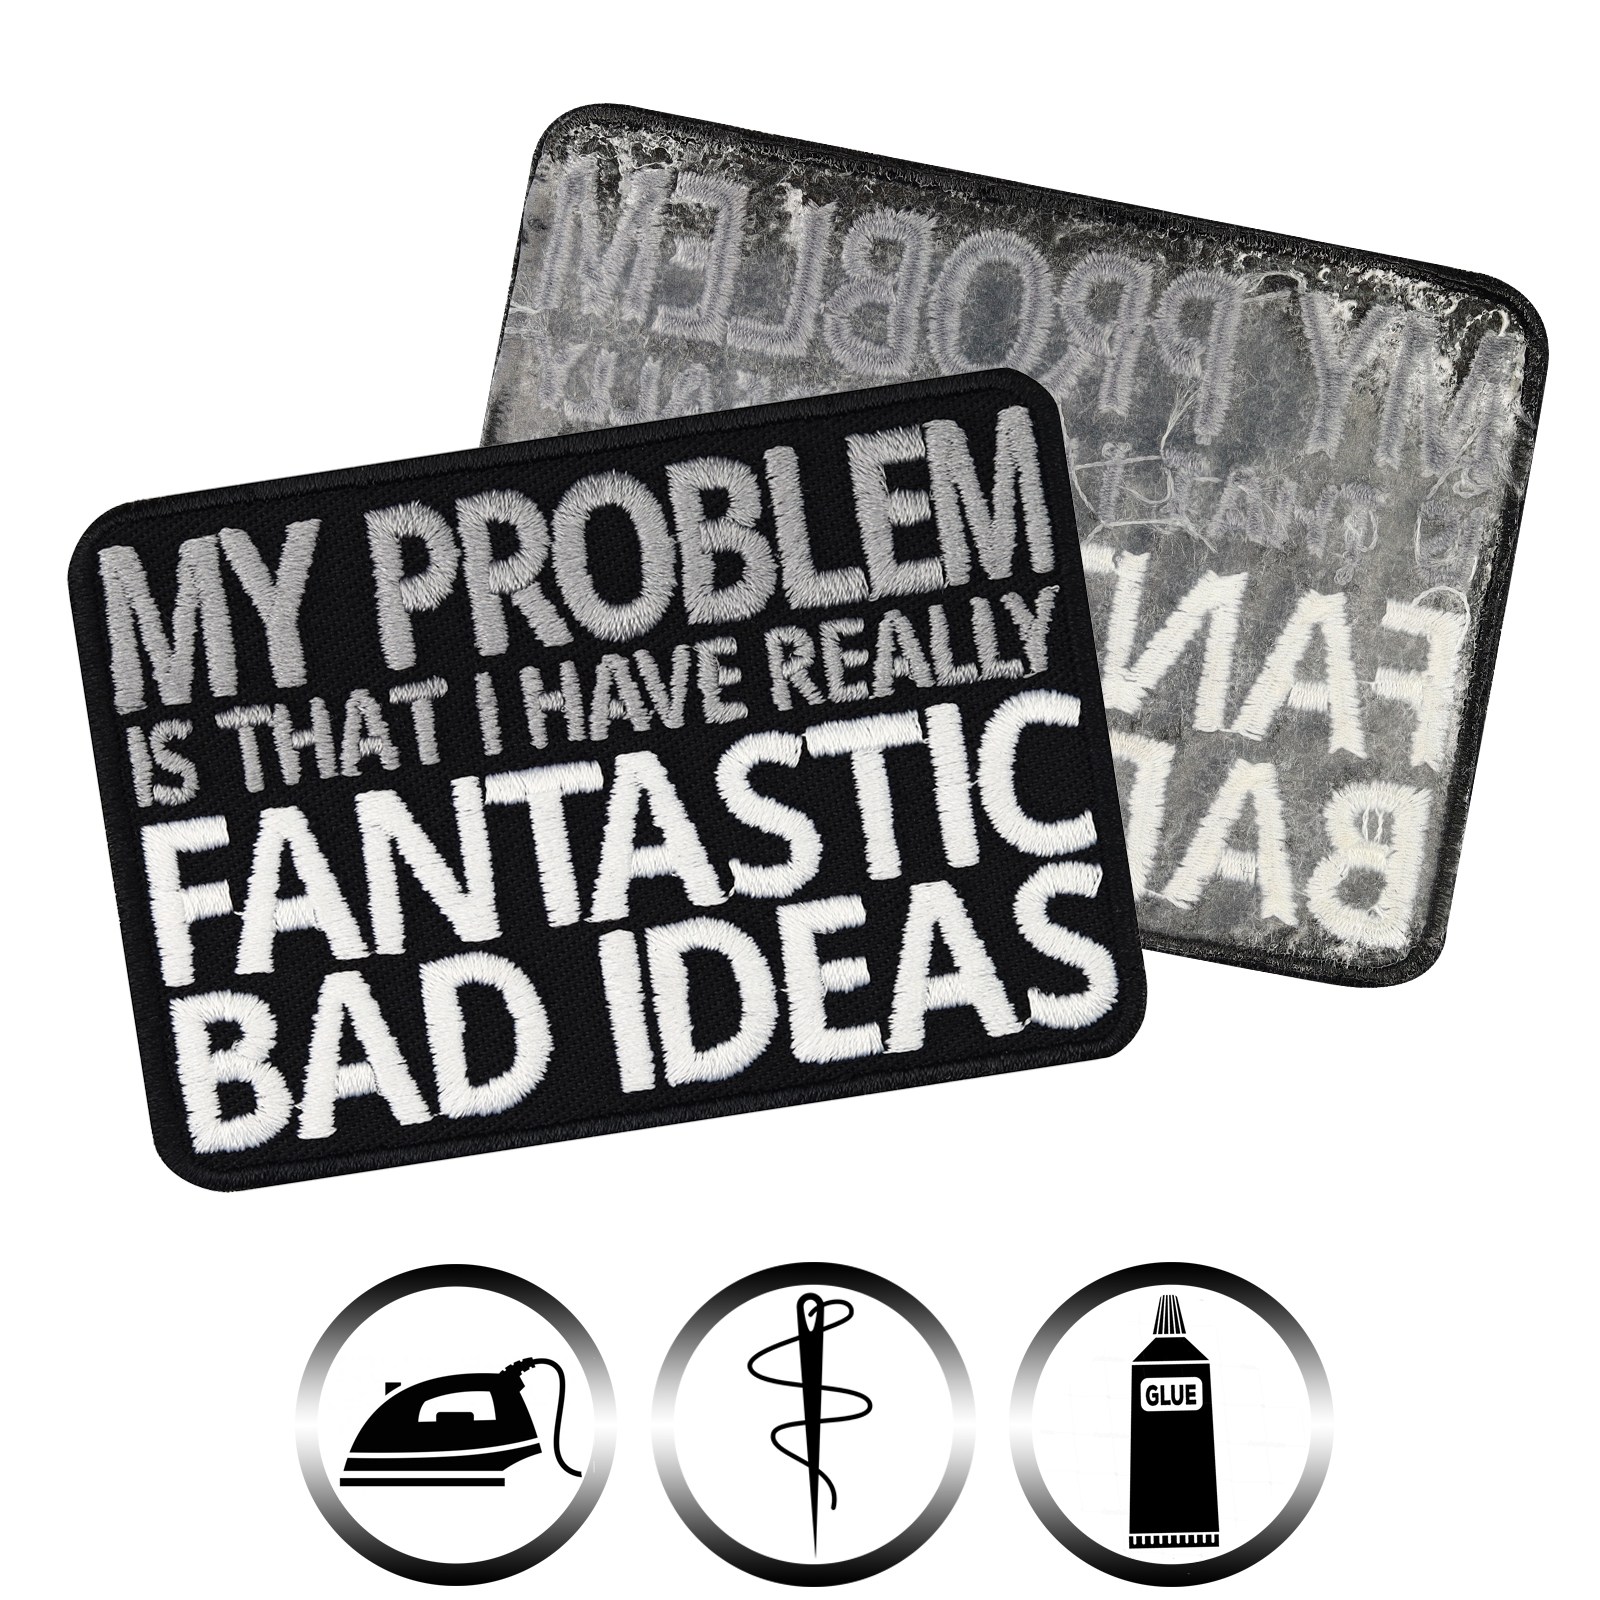 My problem is, that I have really fantastic bad ideas. - Patch